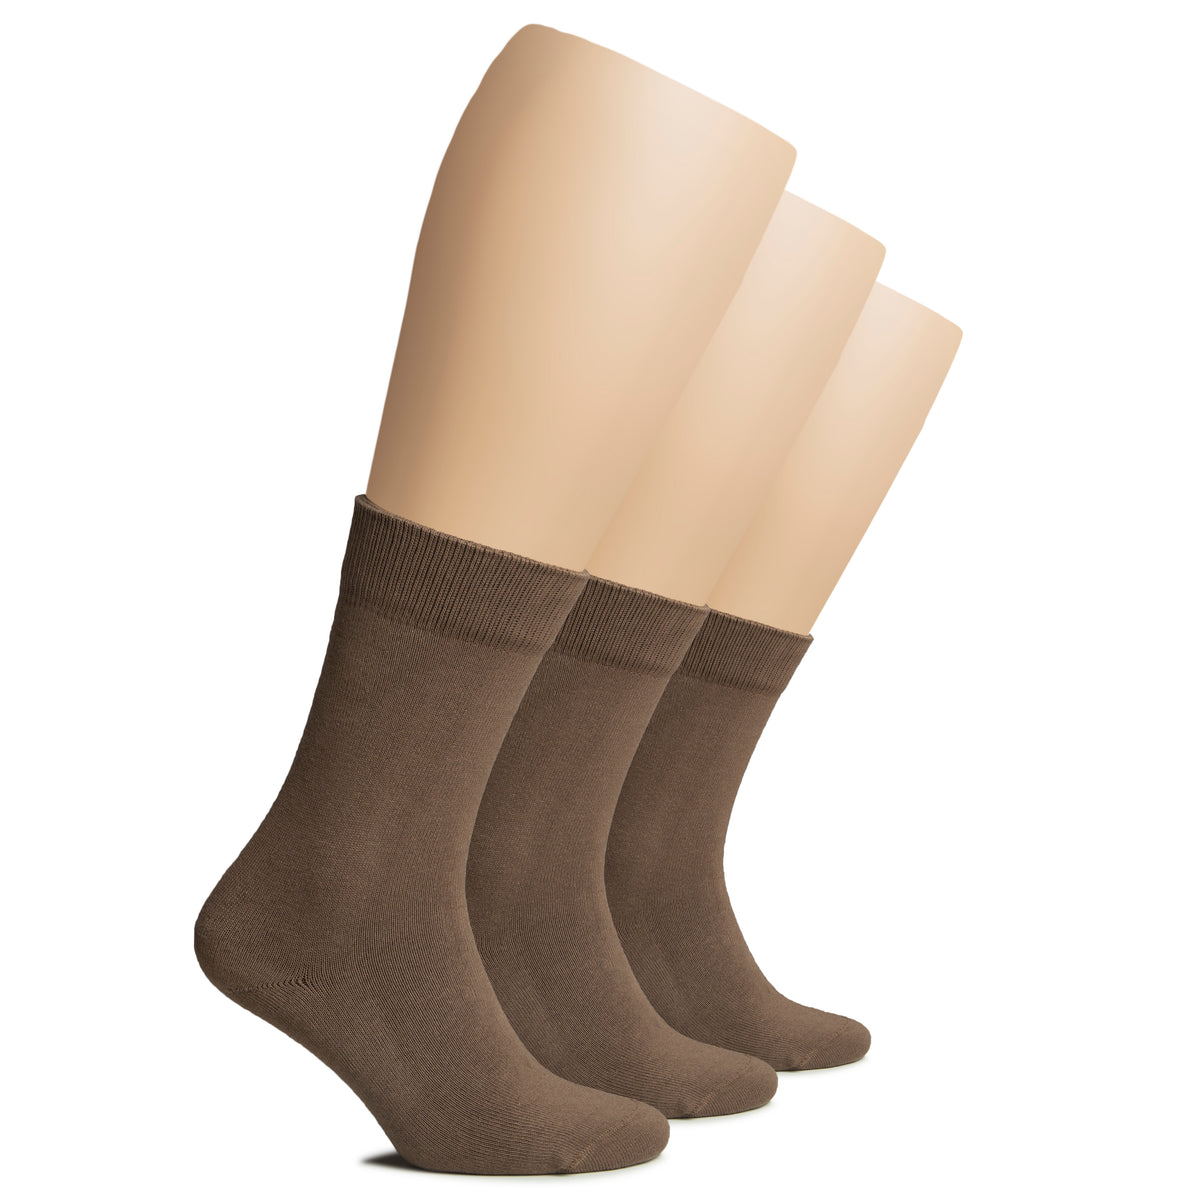 A trio of brown Women's Winter Cotton Crew Socks, neatly arranged on a white background.